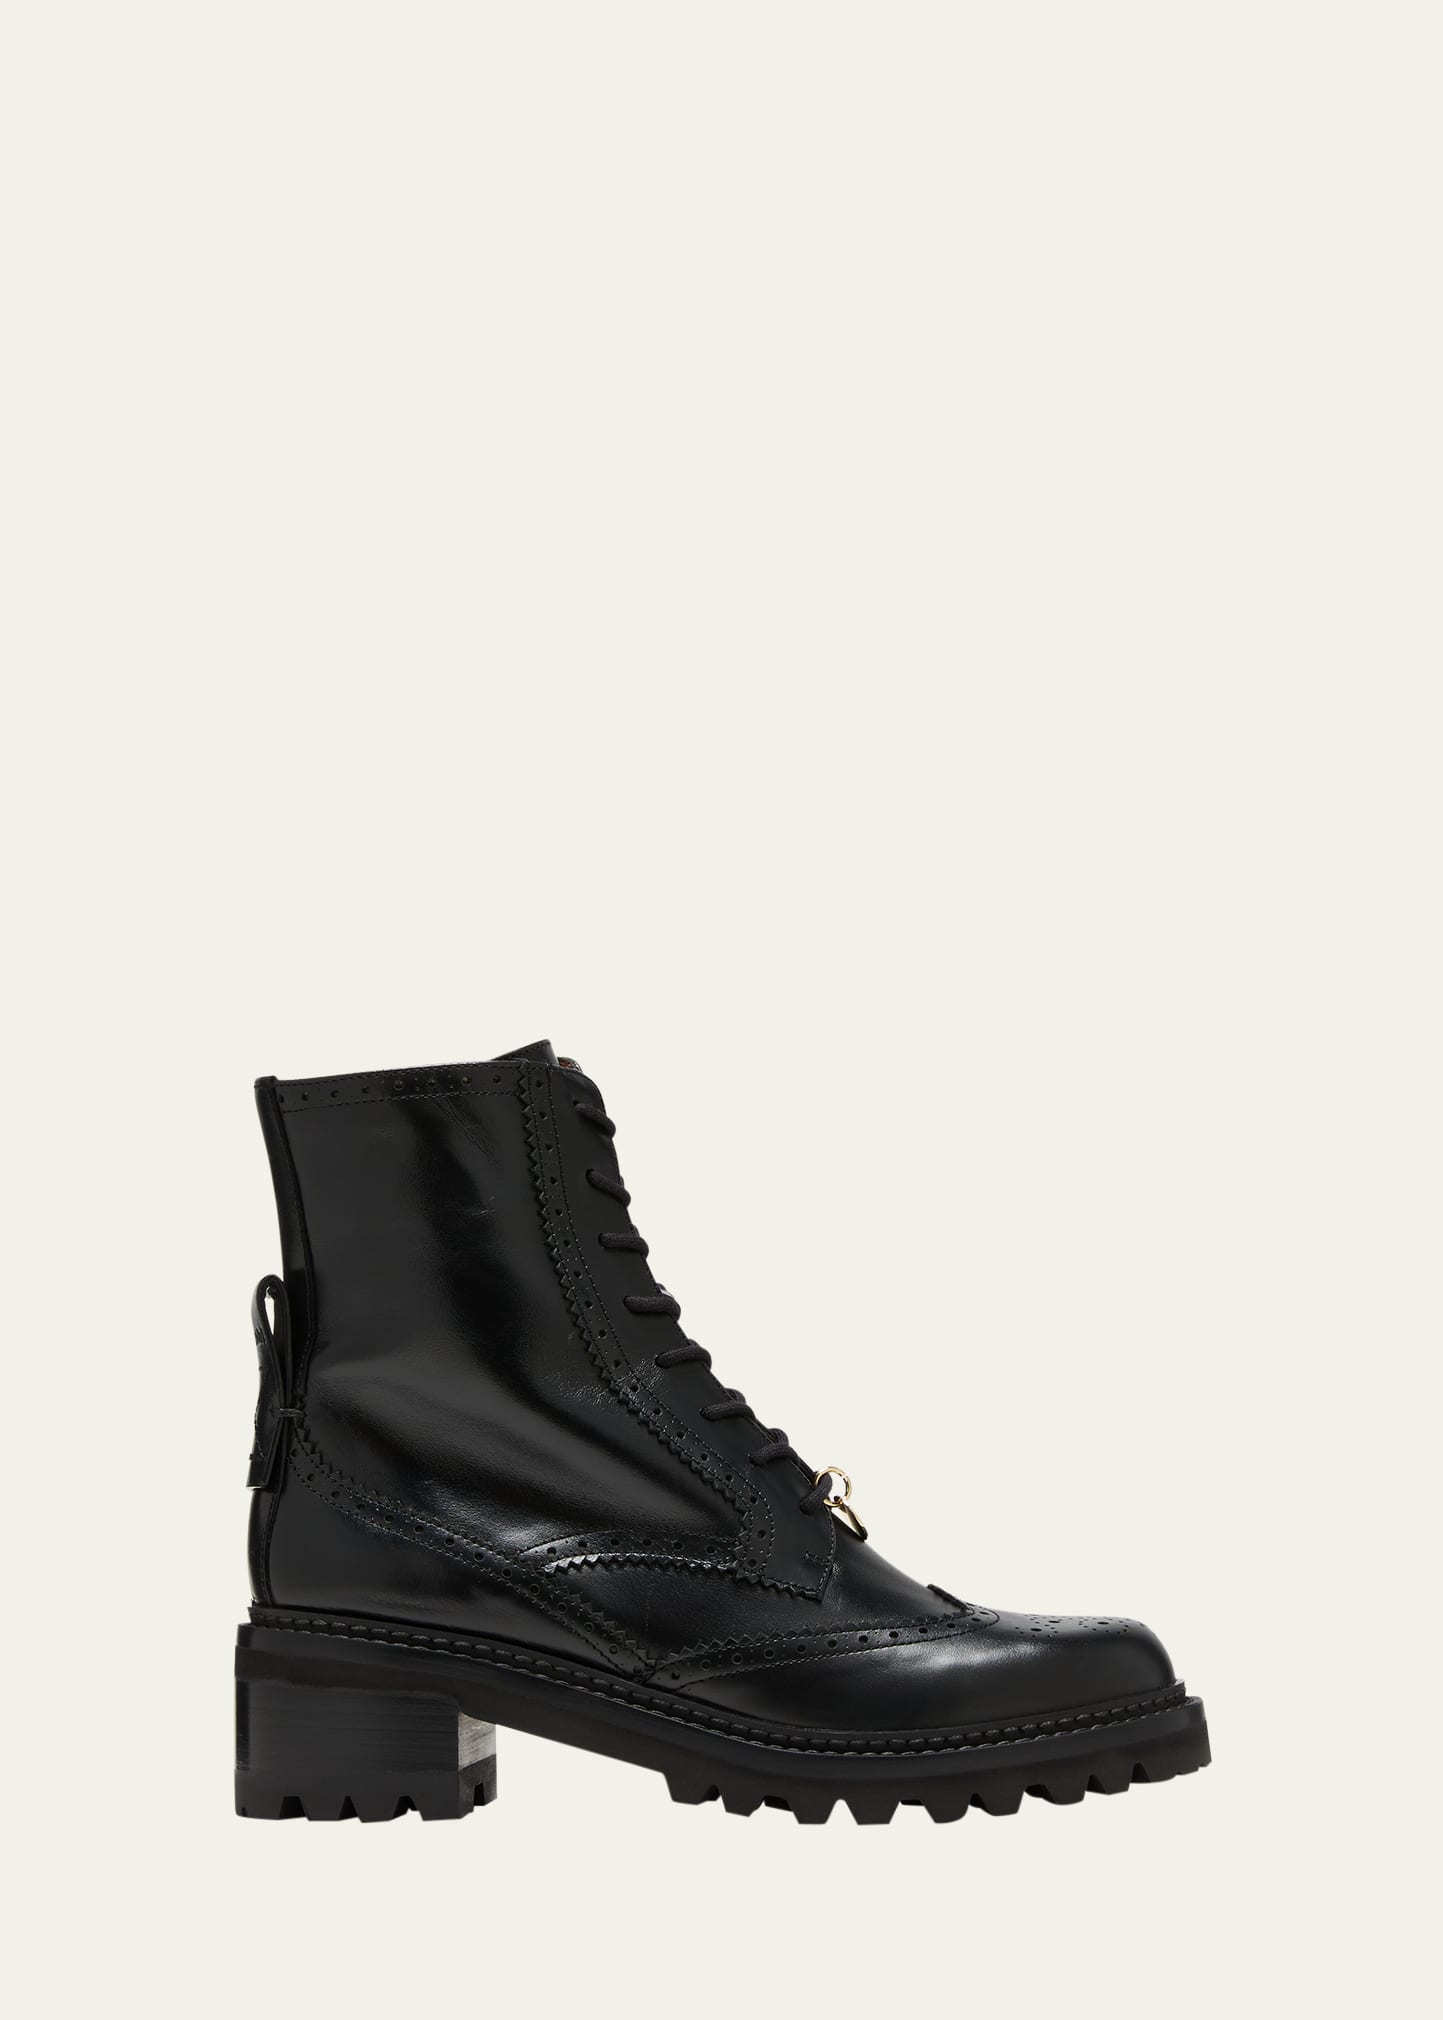 SEE BY CHLOÉ ARIIA WING-TIP LEATHER COMBAT BOOTS